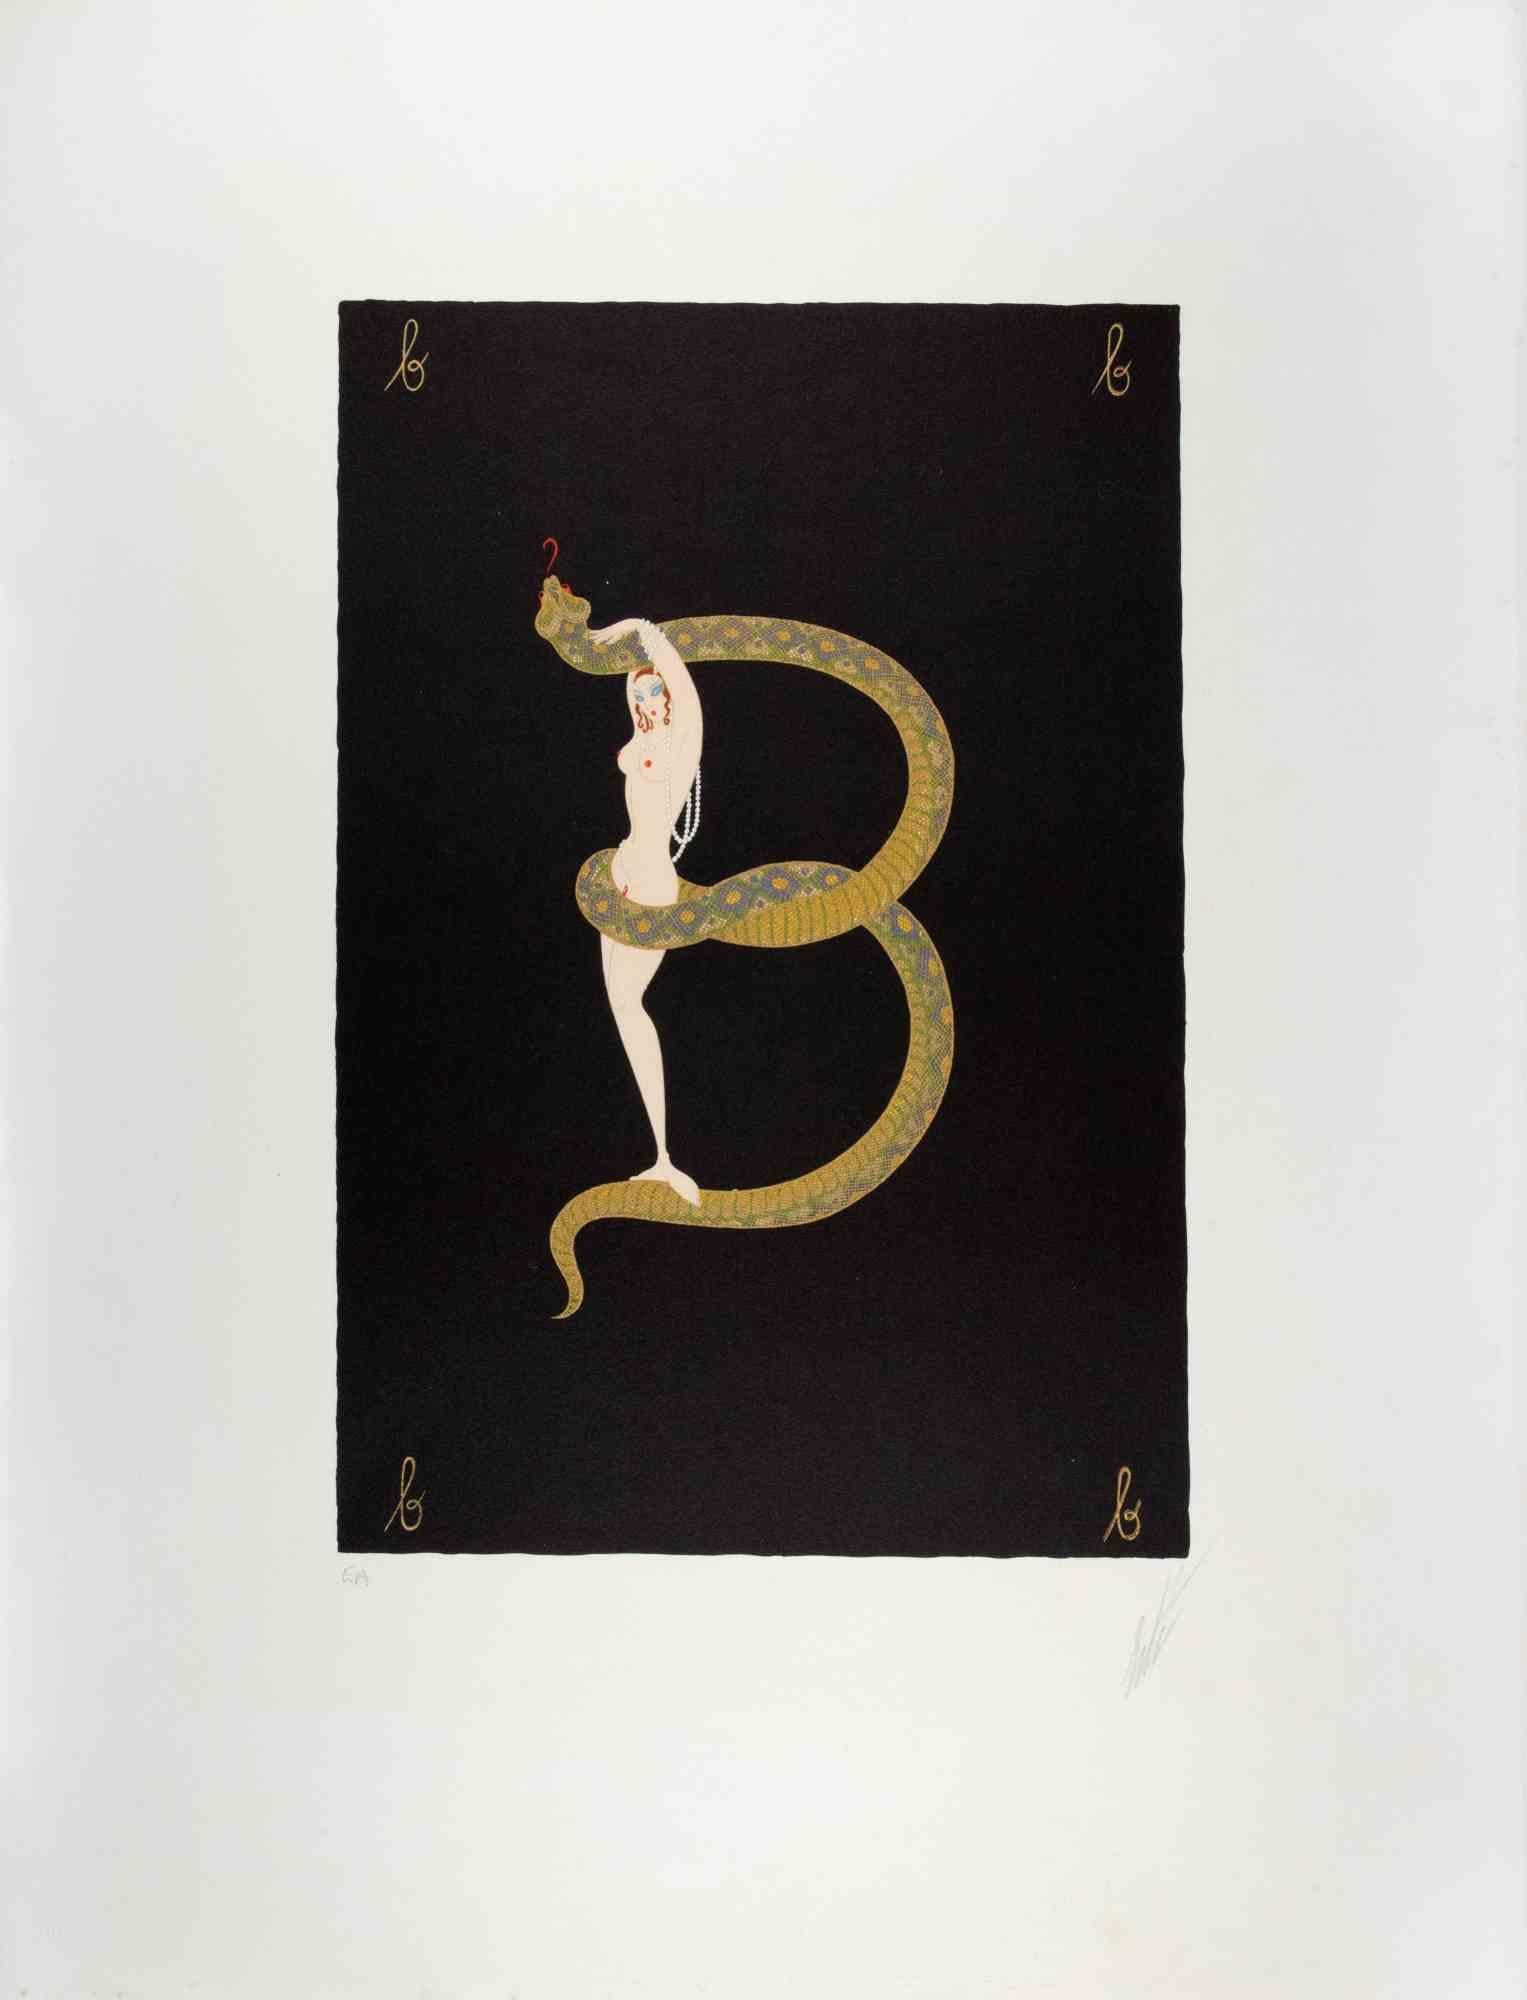 Letter B - from the suite Letters of the Alphabet is a contemporary artwork realized by Erté (Romain de Tirtoff.

Lithograph and Screen Print.

The artwork is from the suite "Letters of the Alphabet", 1976,

Hand signed on th elower margin. Artist